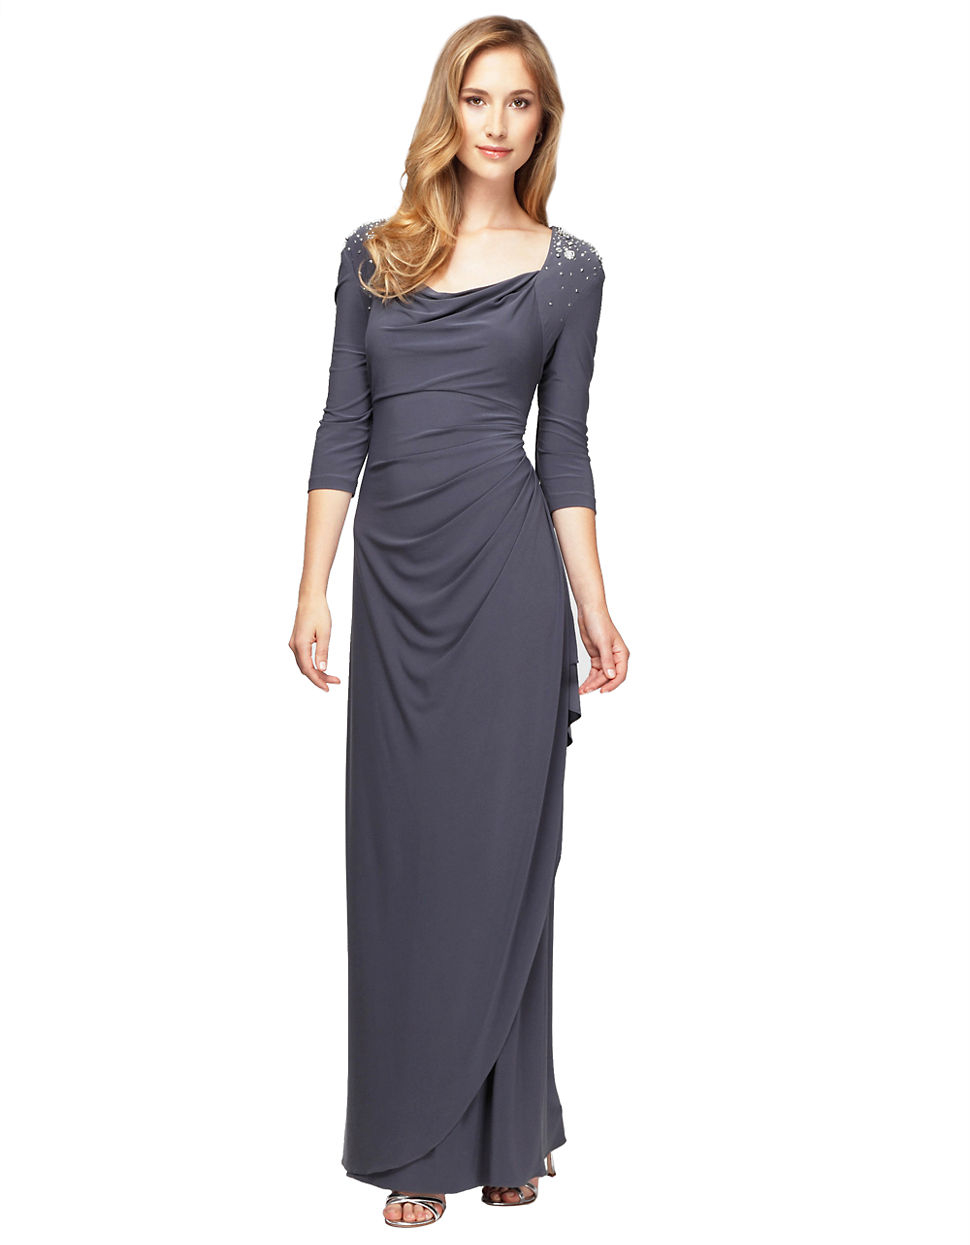 Lyst - Alex Evenings Plus Side Ruched Cowl Neck Gown in Gray